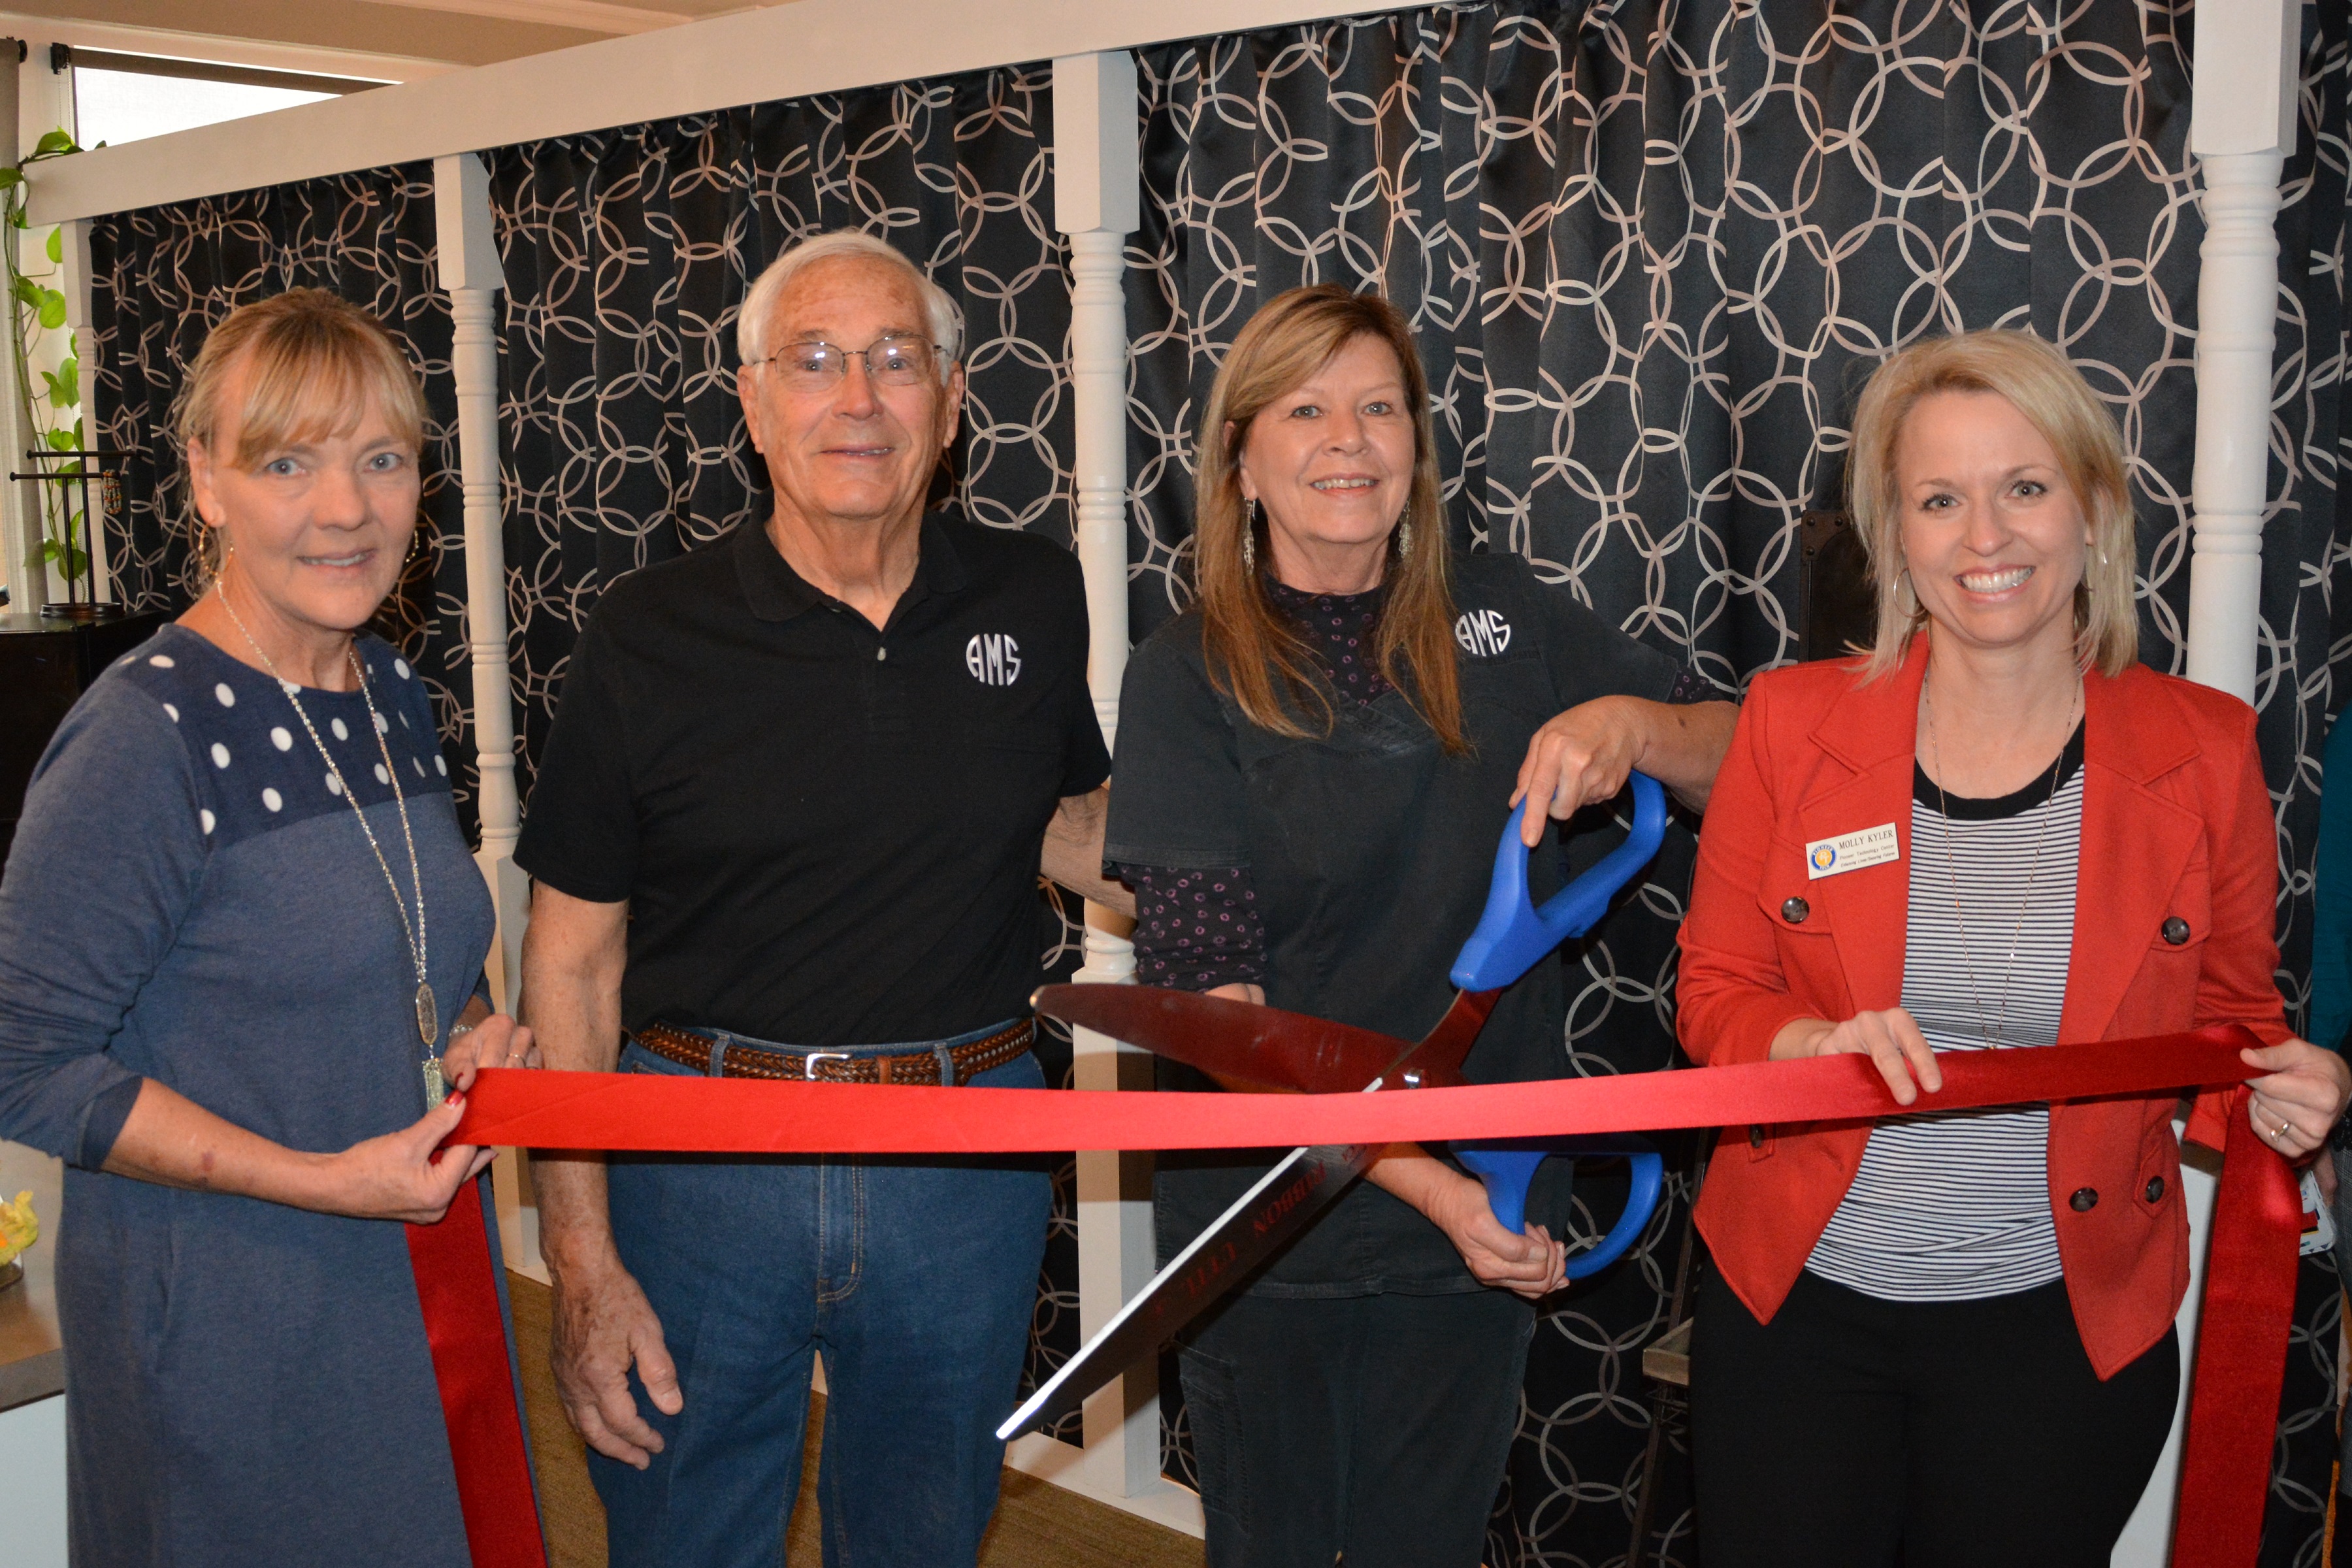 Chamber helps with ribbon cutting